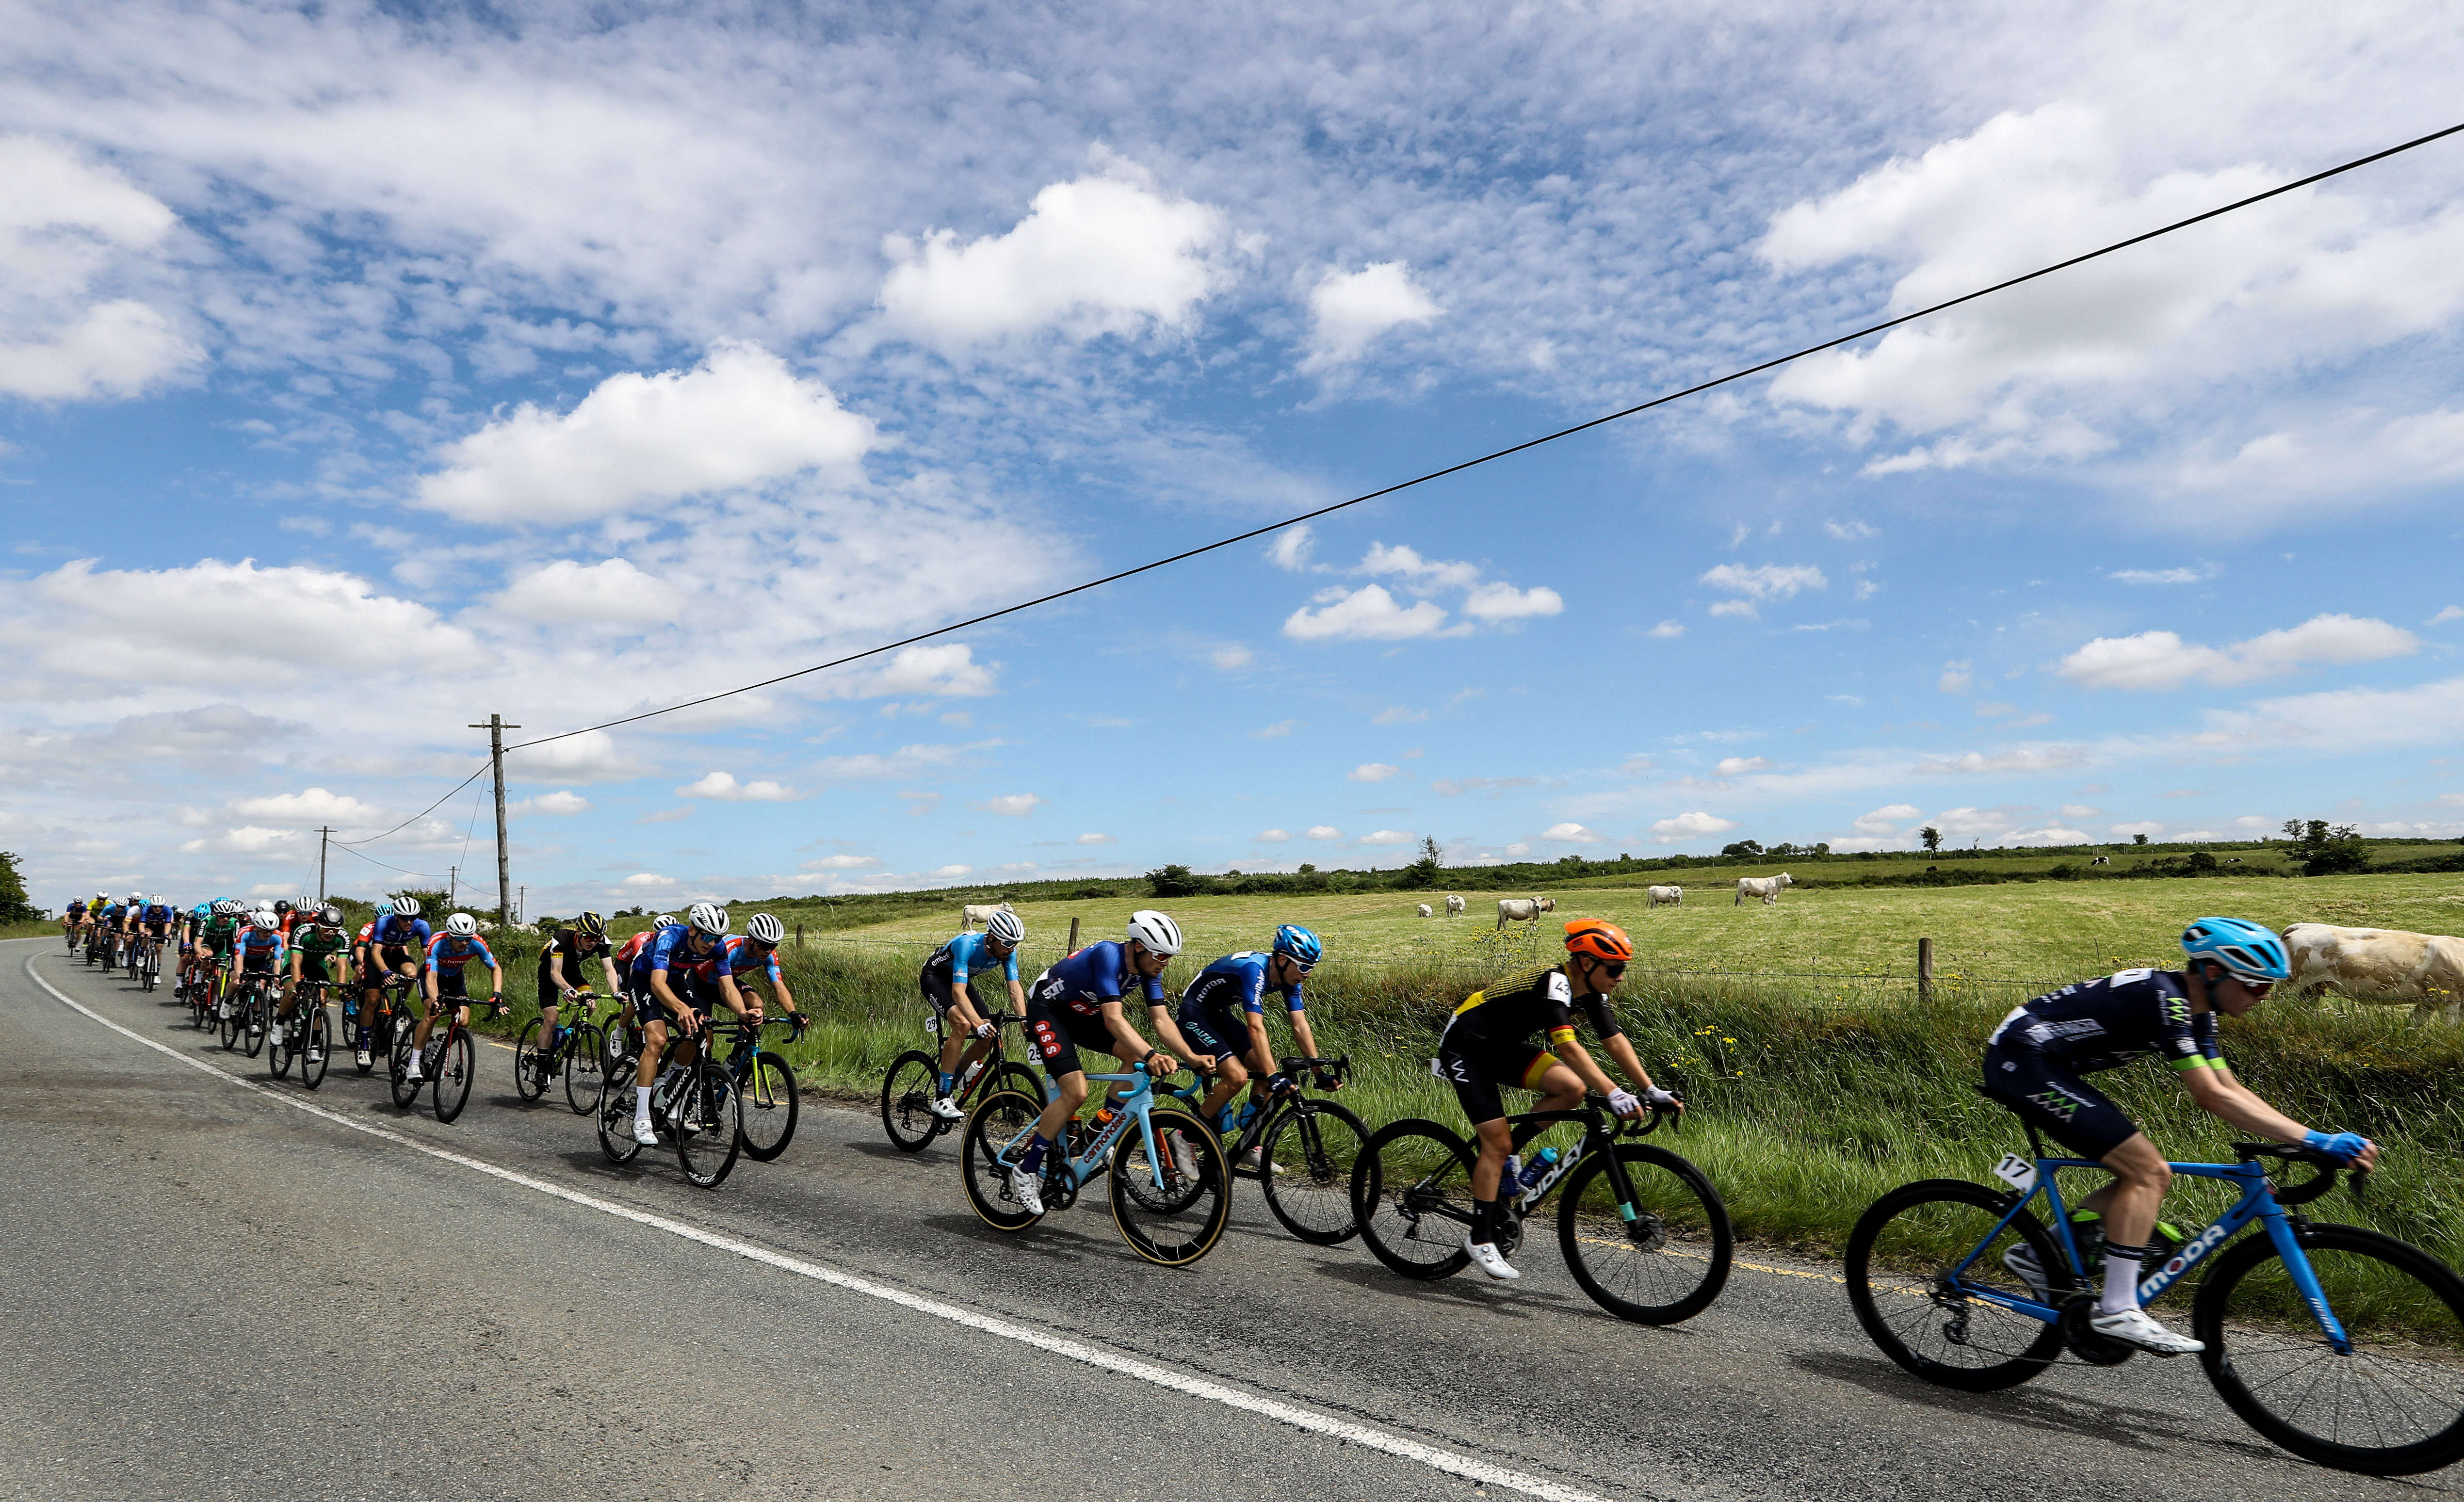 Famed Ras Tailteann cycling race comes through Limerick on Friday